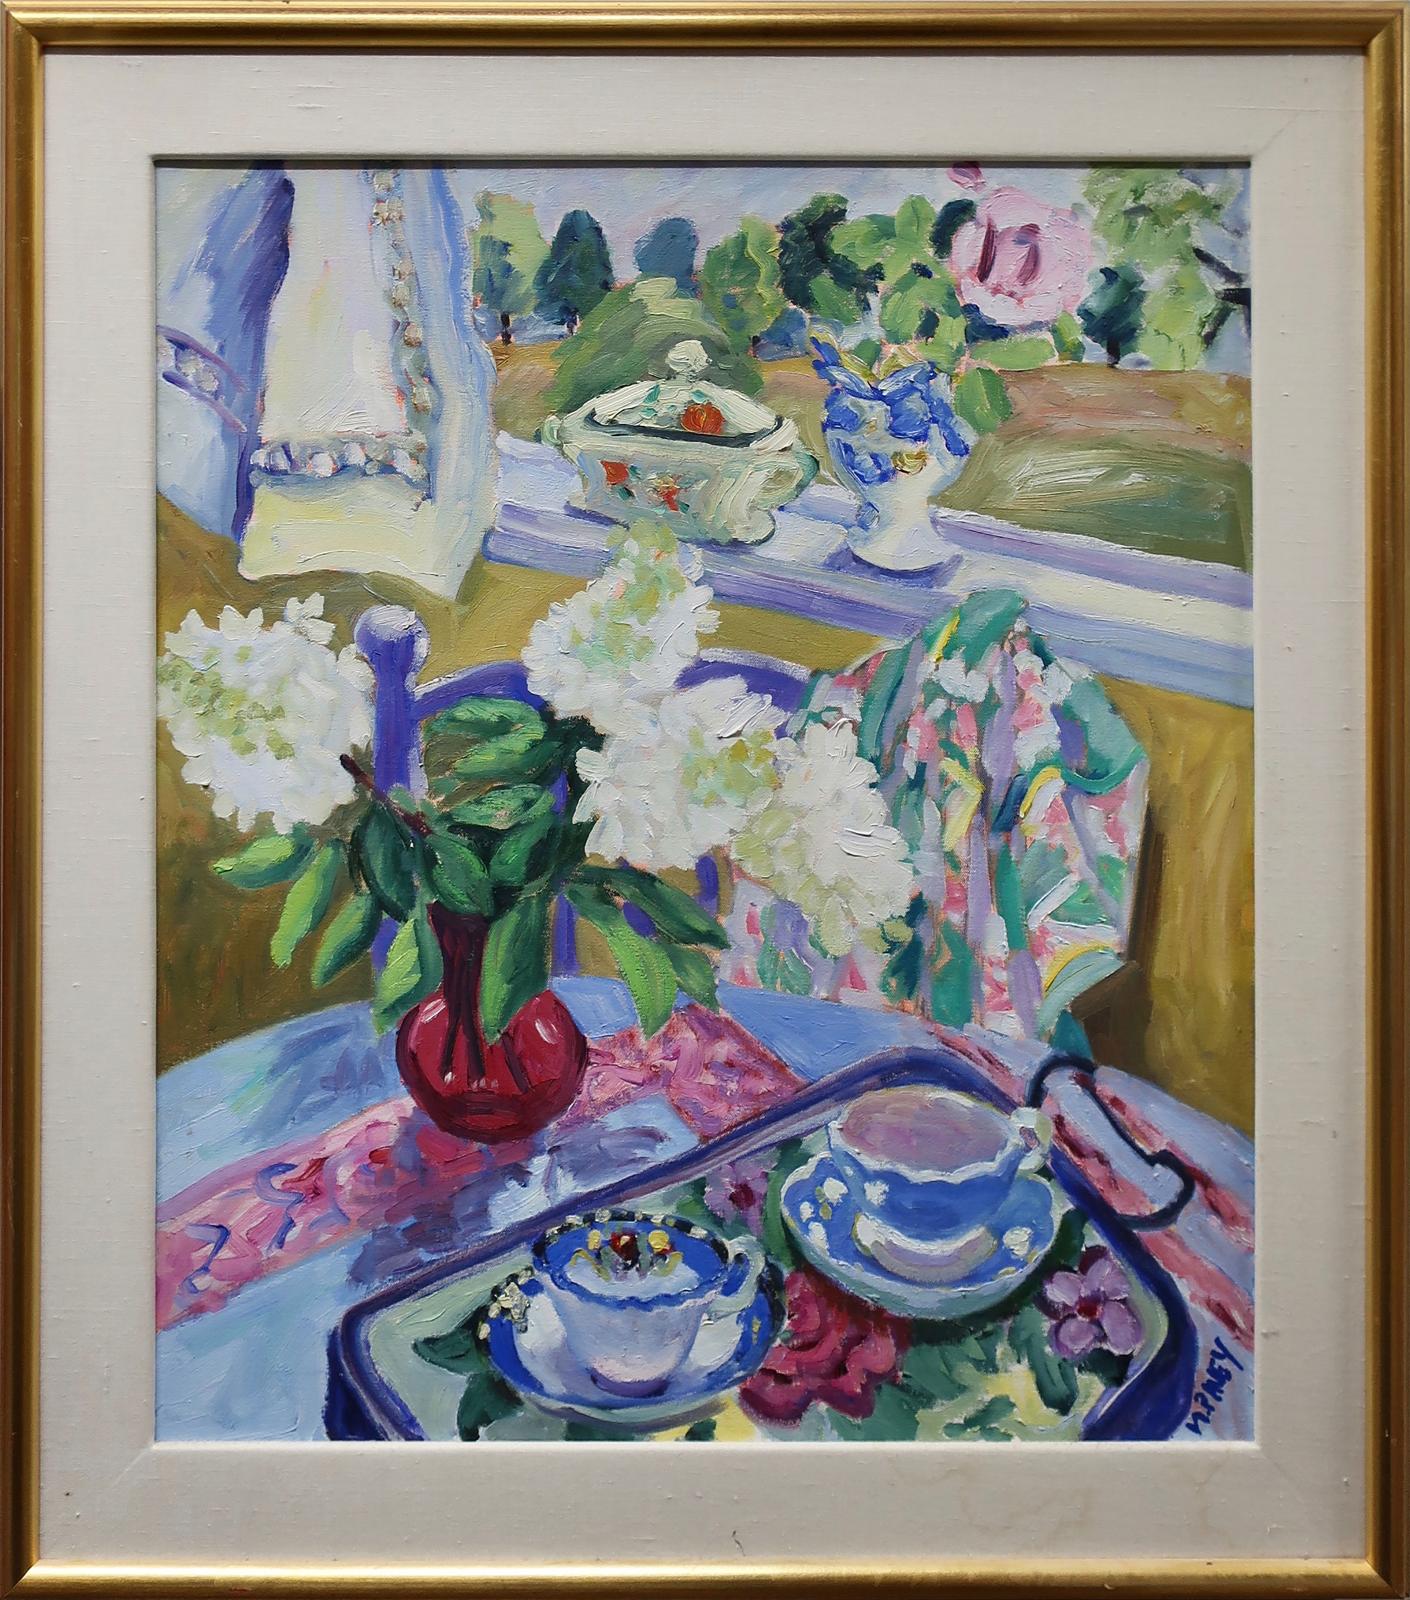 Mary Pavey (1938) - Untitled (Flowers And Tea Cups)